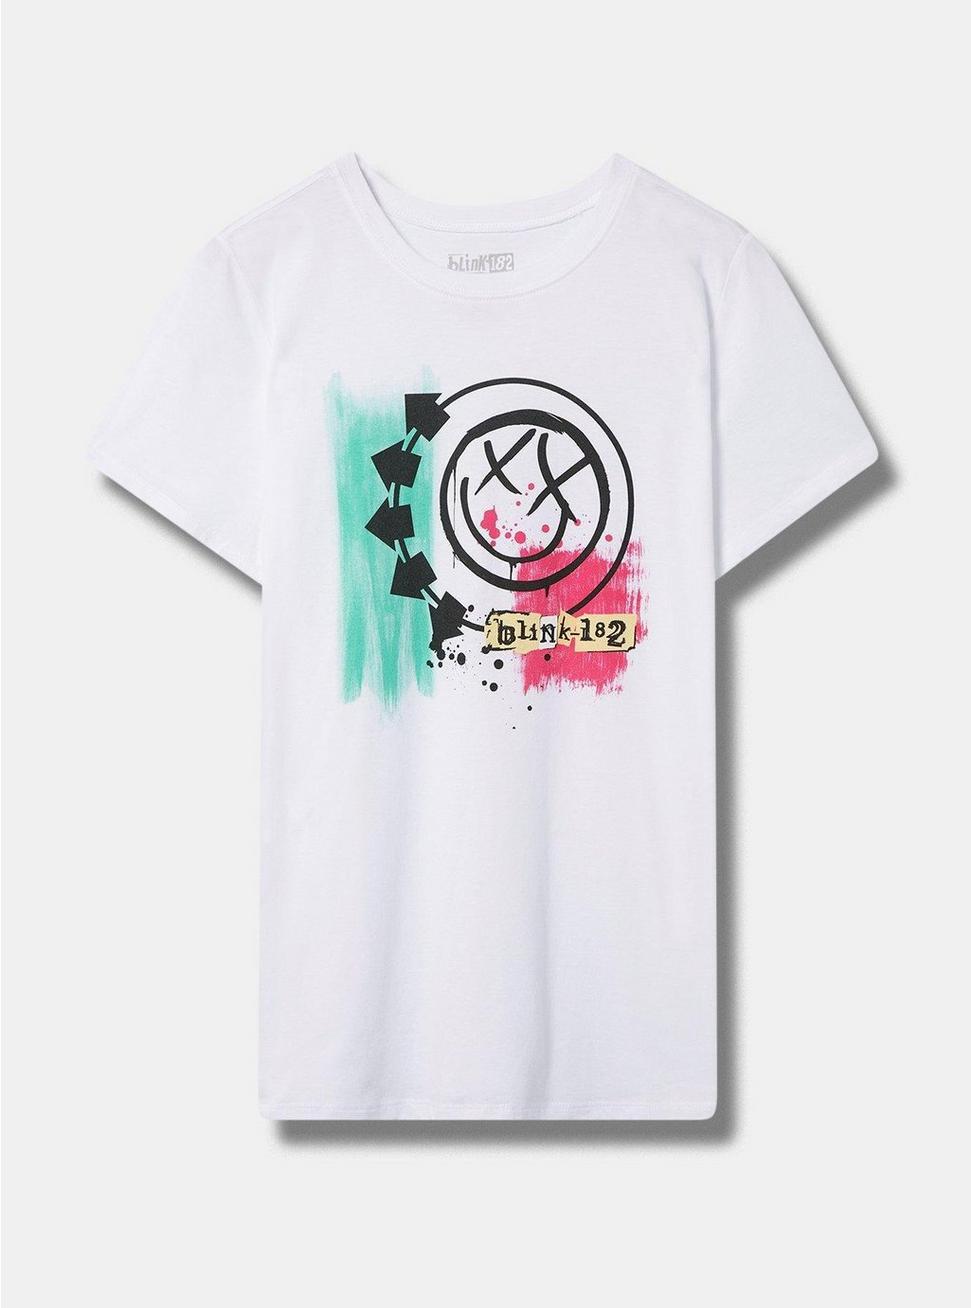 Blink-182 Classic Fit Cotton Crew Tee, BRIGHT WHITE, hi-res